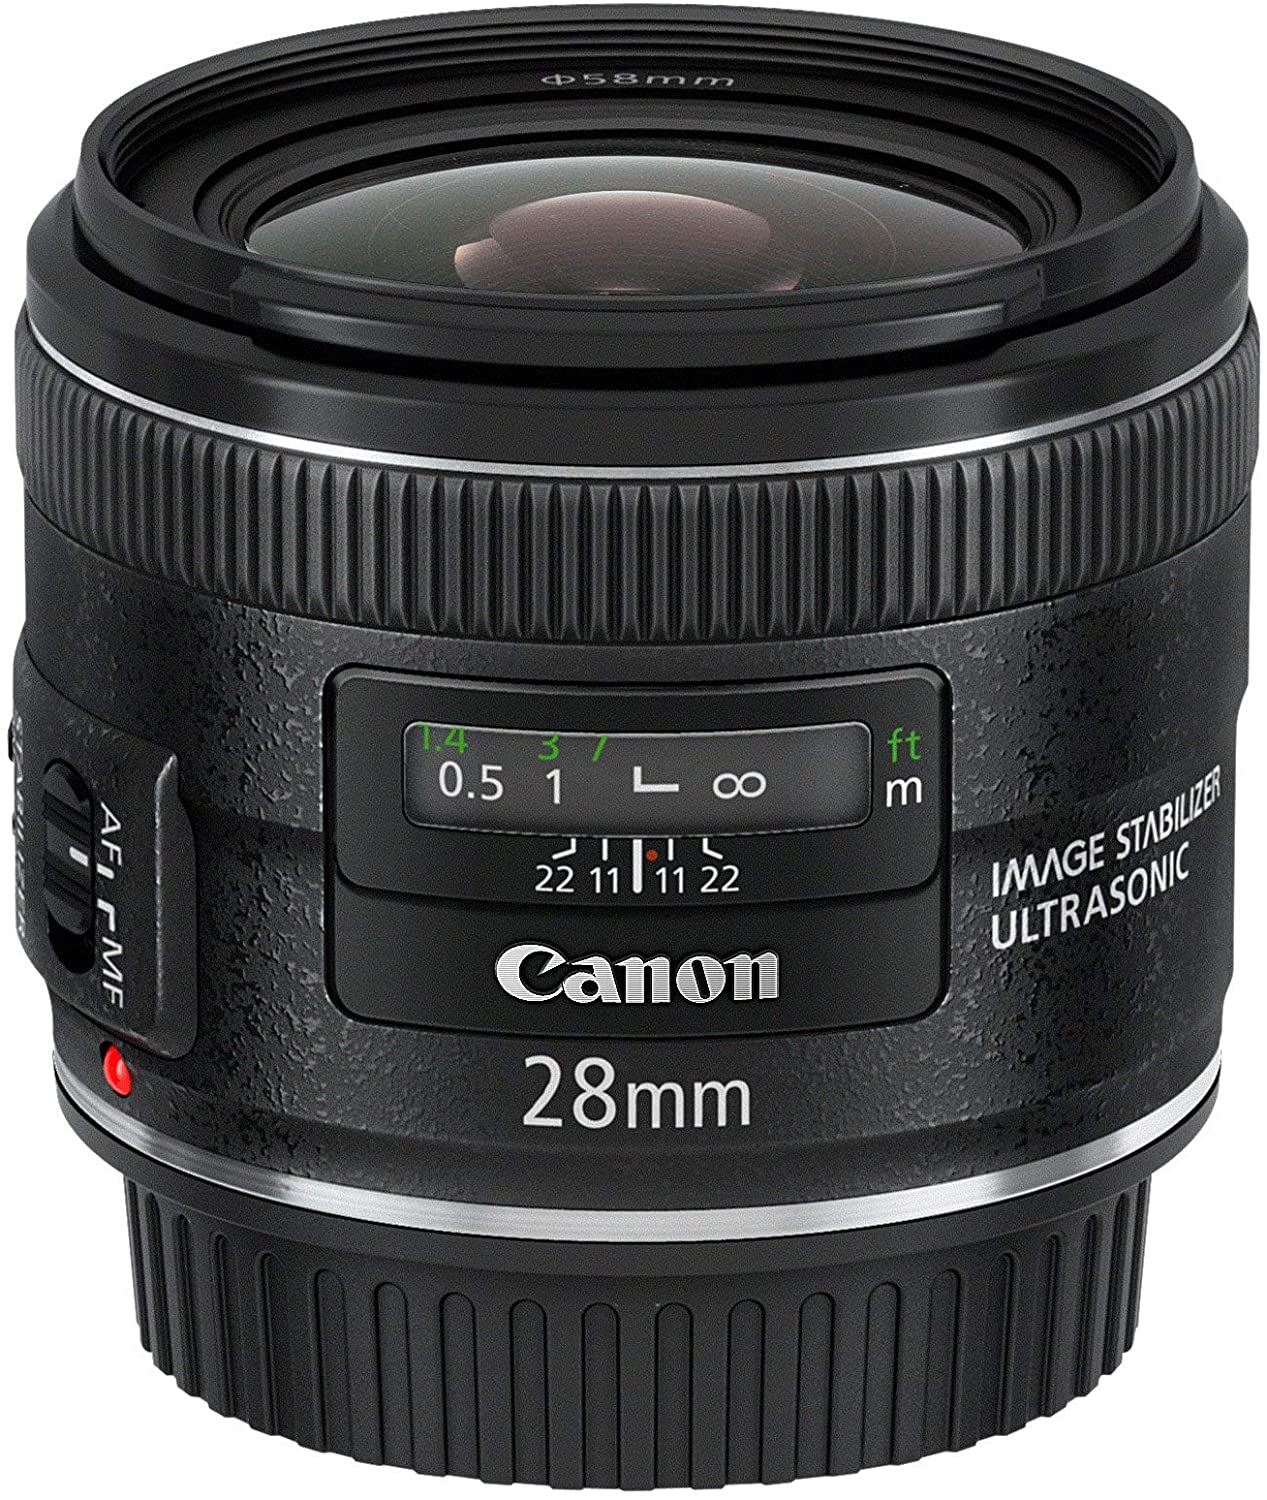 Canon EF 28mm f2.8 IS USM Lens - Lenses and Cameras